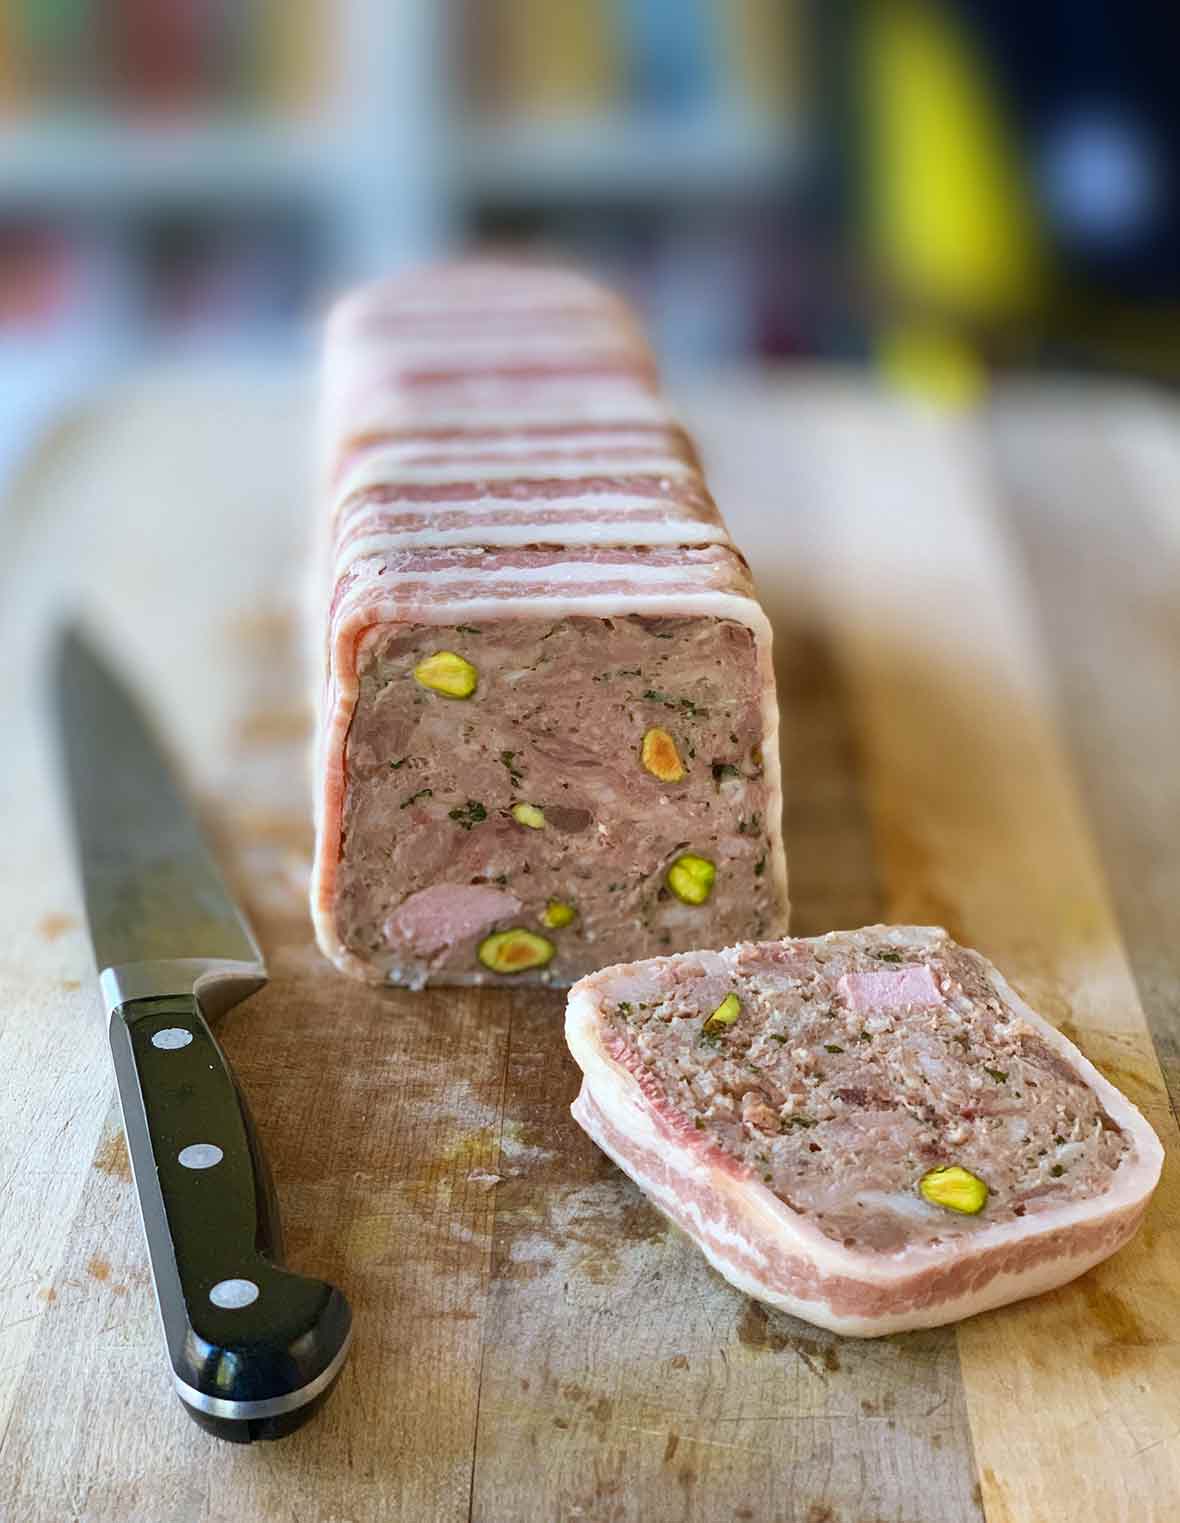 A terrine of country pate with one slice cut and resting on a wooden cutting board with a knife beside it